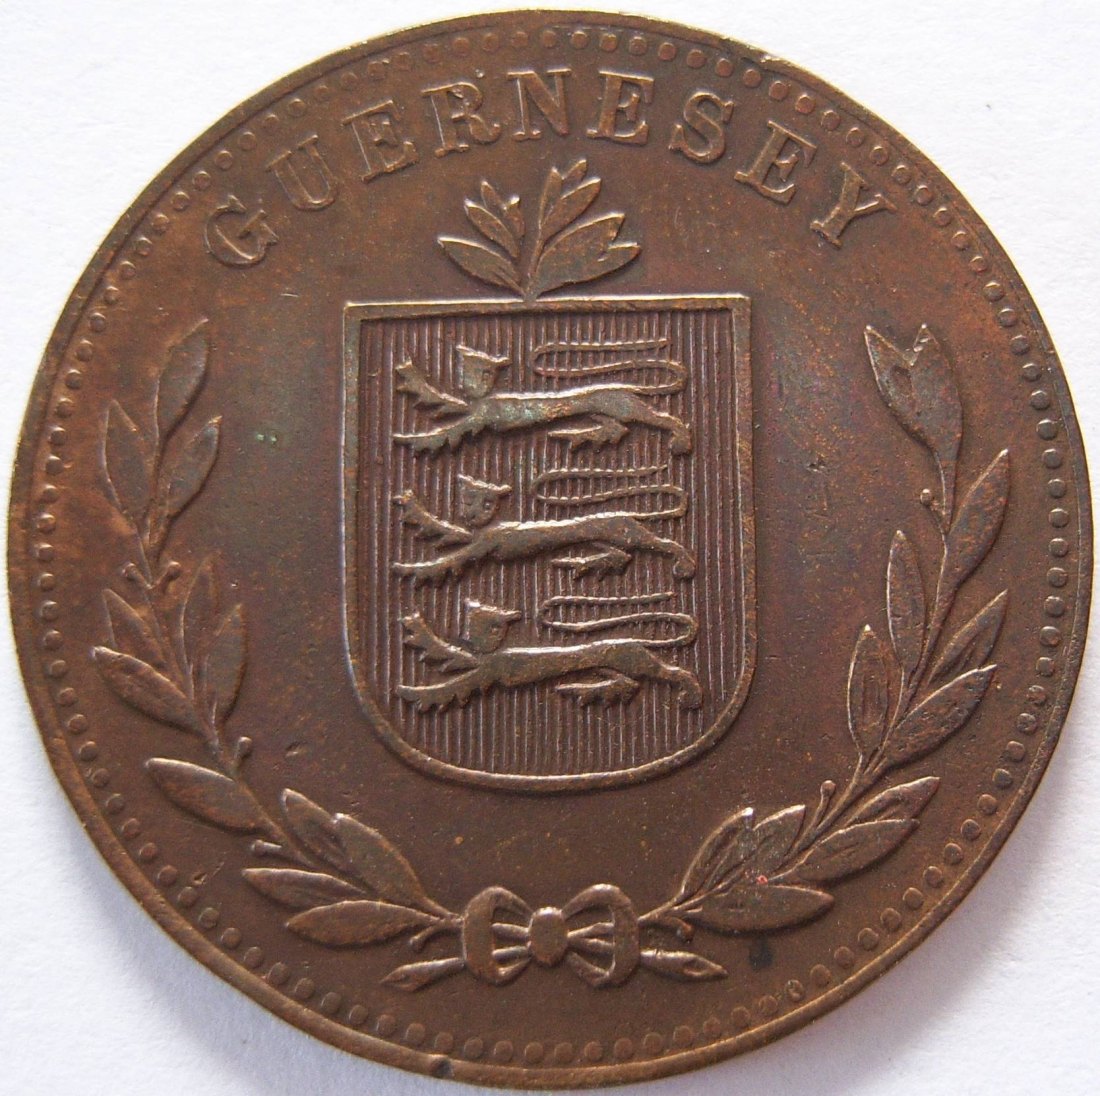  Guernsey 8 Doubles 1918 H   